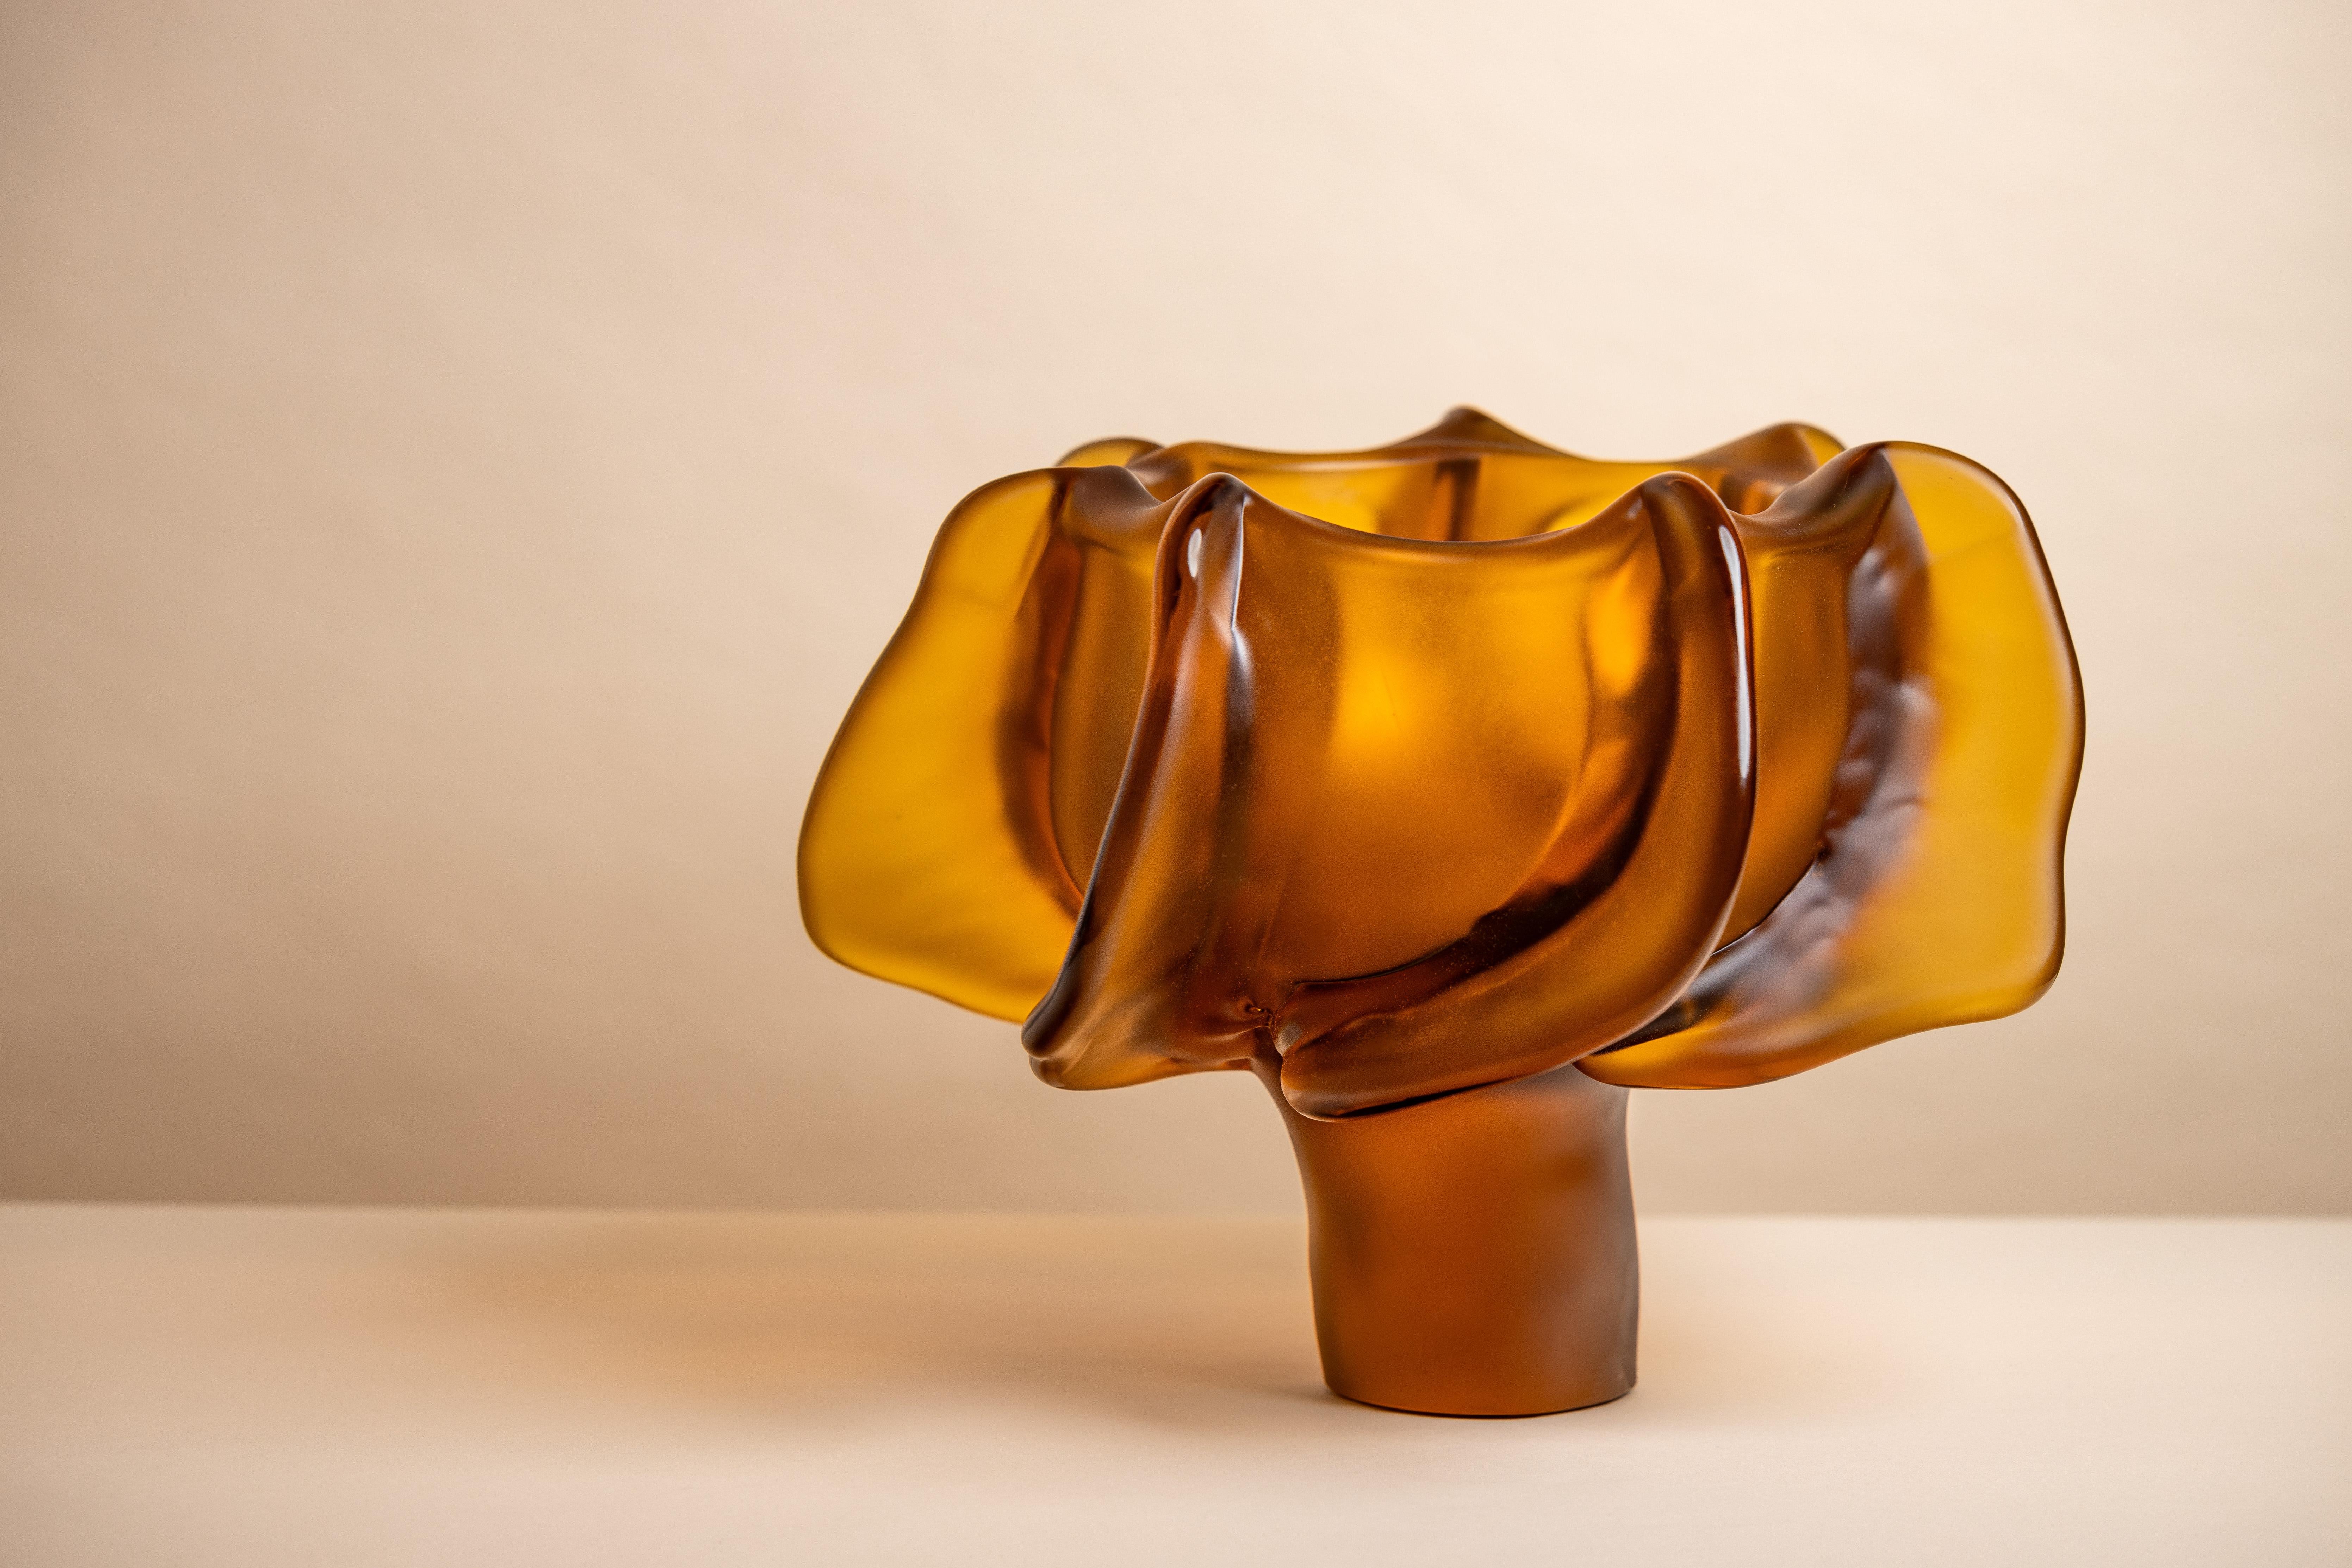 Naturalia consists of one-off pieces in amber, gold, dark burgundy, and hydrangea, expressing Michela Cattai’s fascination with nature in all of its unpredictable forms and manifestations. Each piece was crafted in Murano, with the traditional